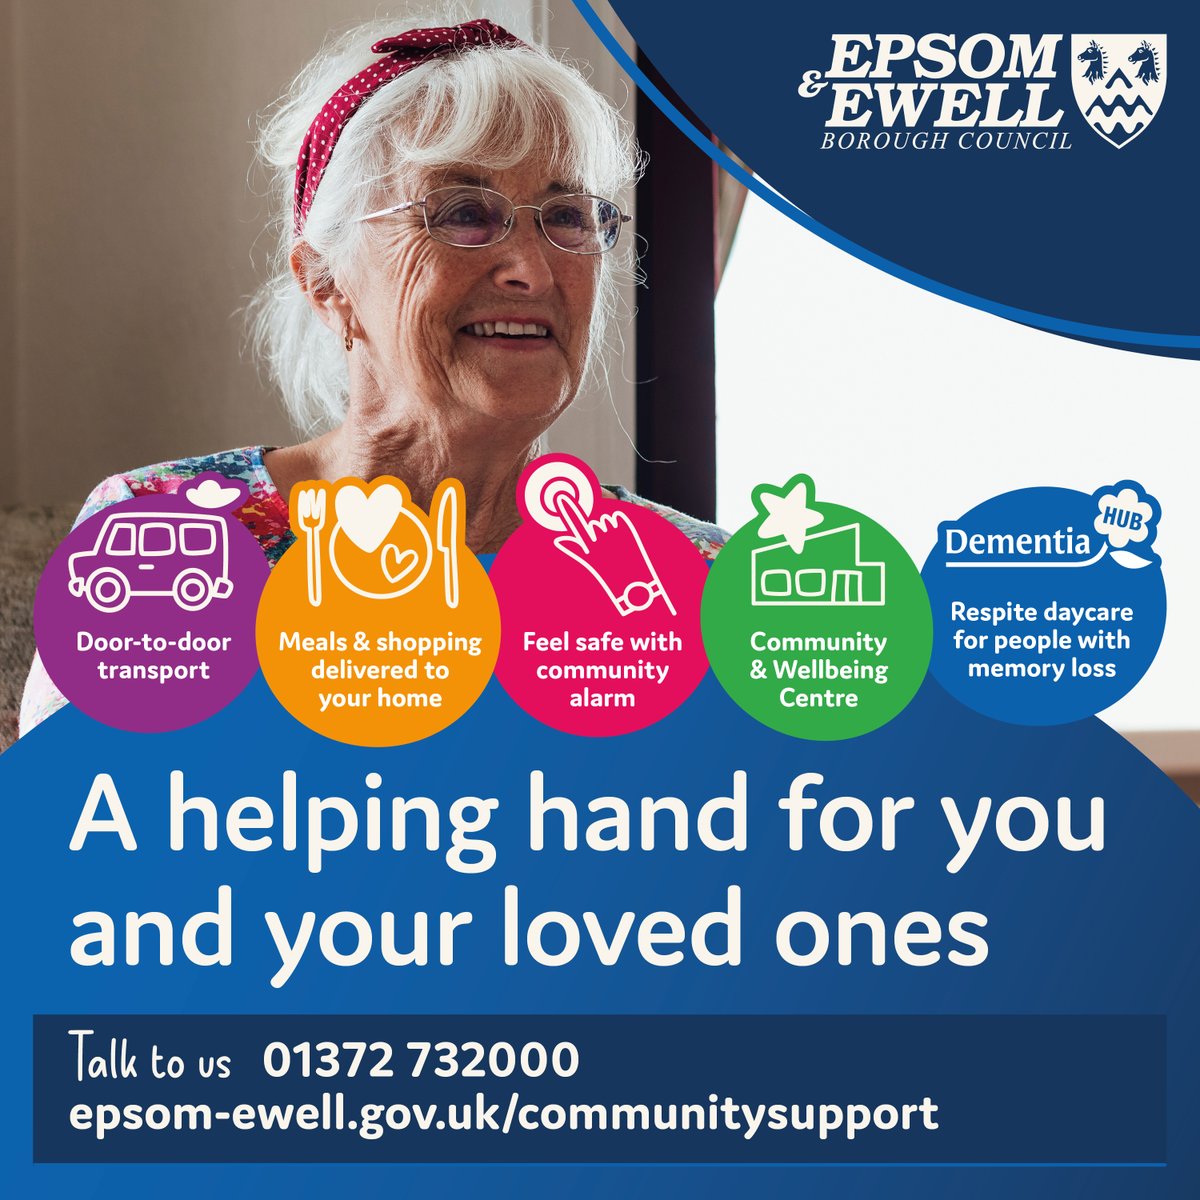 Talk to us if you, or someone you know, could use: •Door-to-door transport •Meals delivered •A personal alarm •Respite care at the Dementia Hub •Friendship and fun at the Community & Wellbeing Centre We're here to offer a helping hand for you and your loved ones.